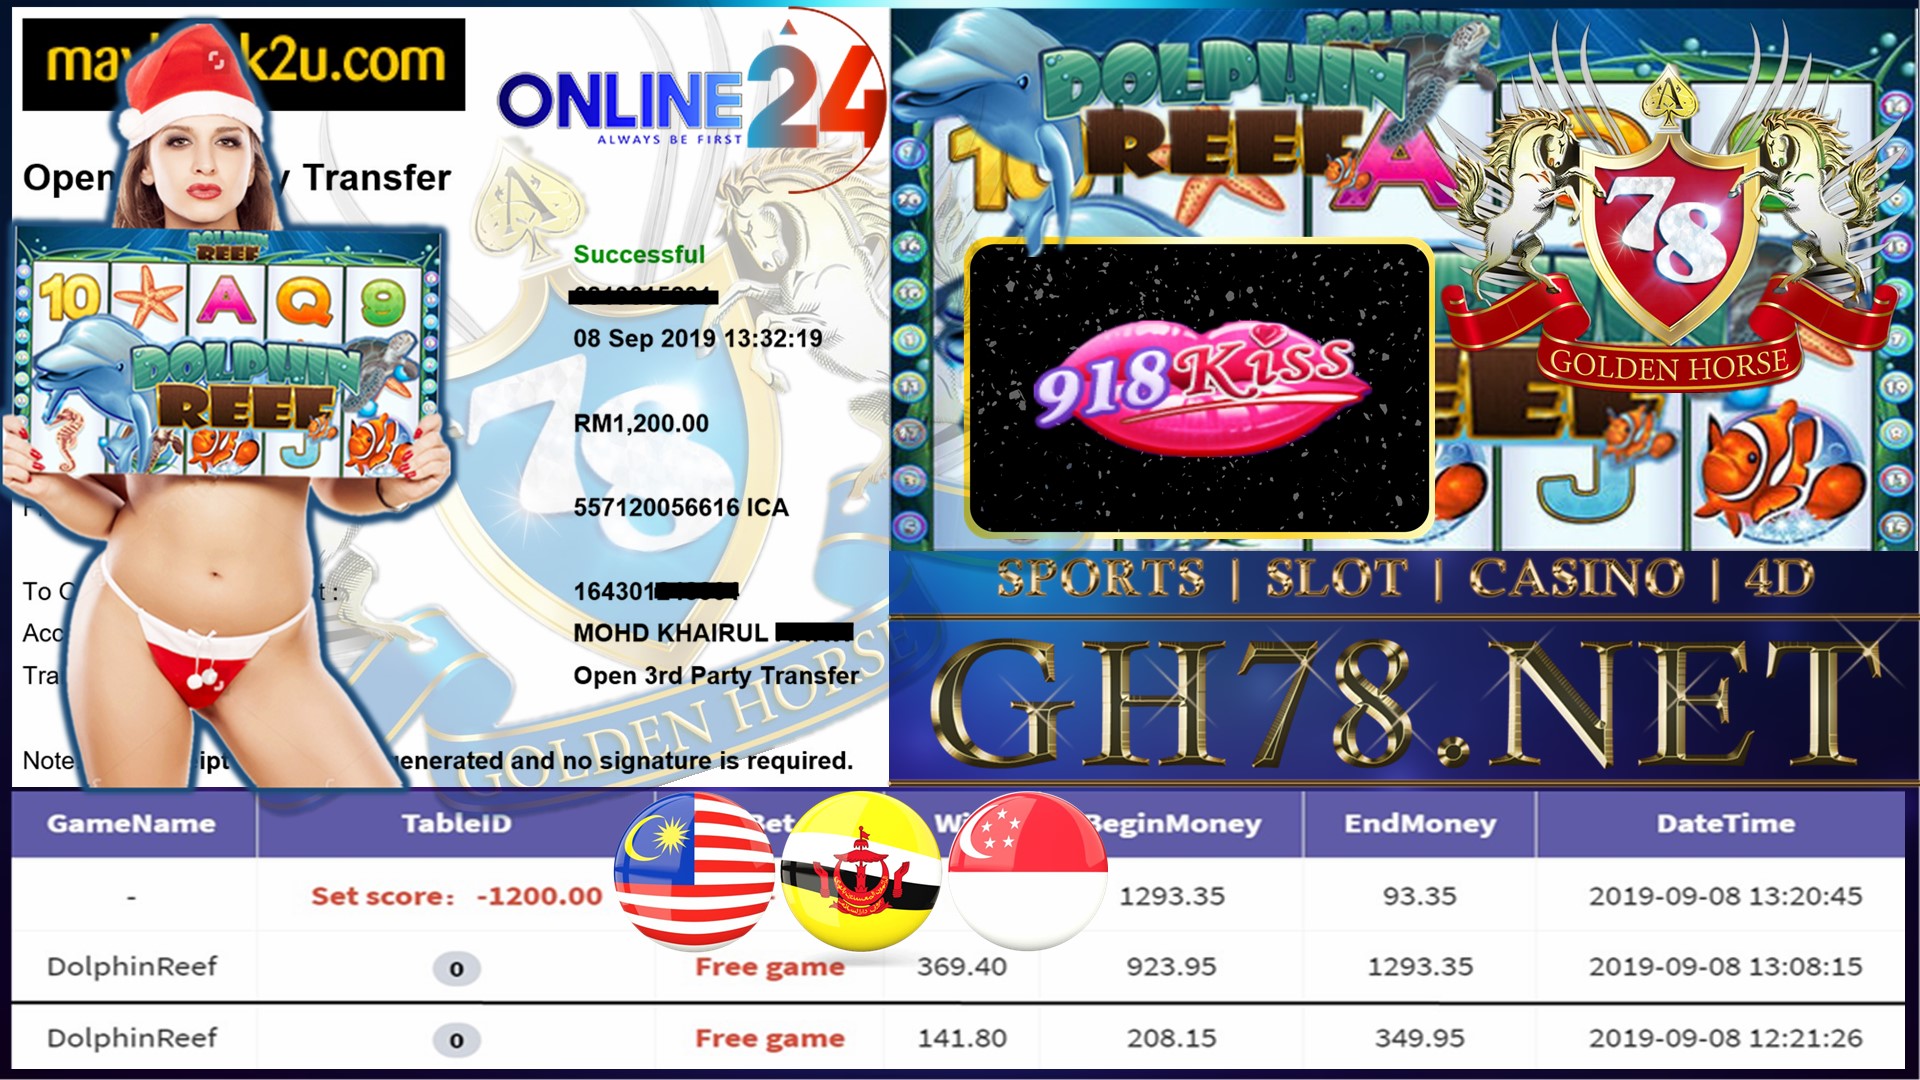 MEMBER MAIN GAME 918KISS FT.DOLPHIN REEF MINTA OUT RM1,200